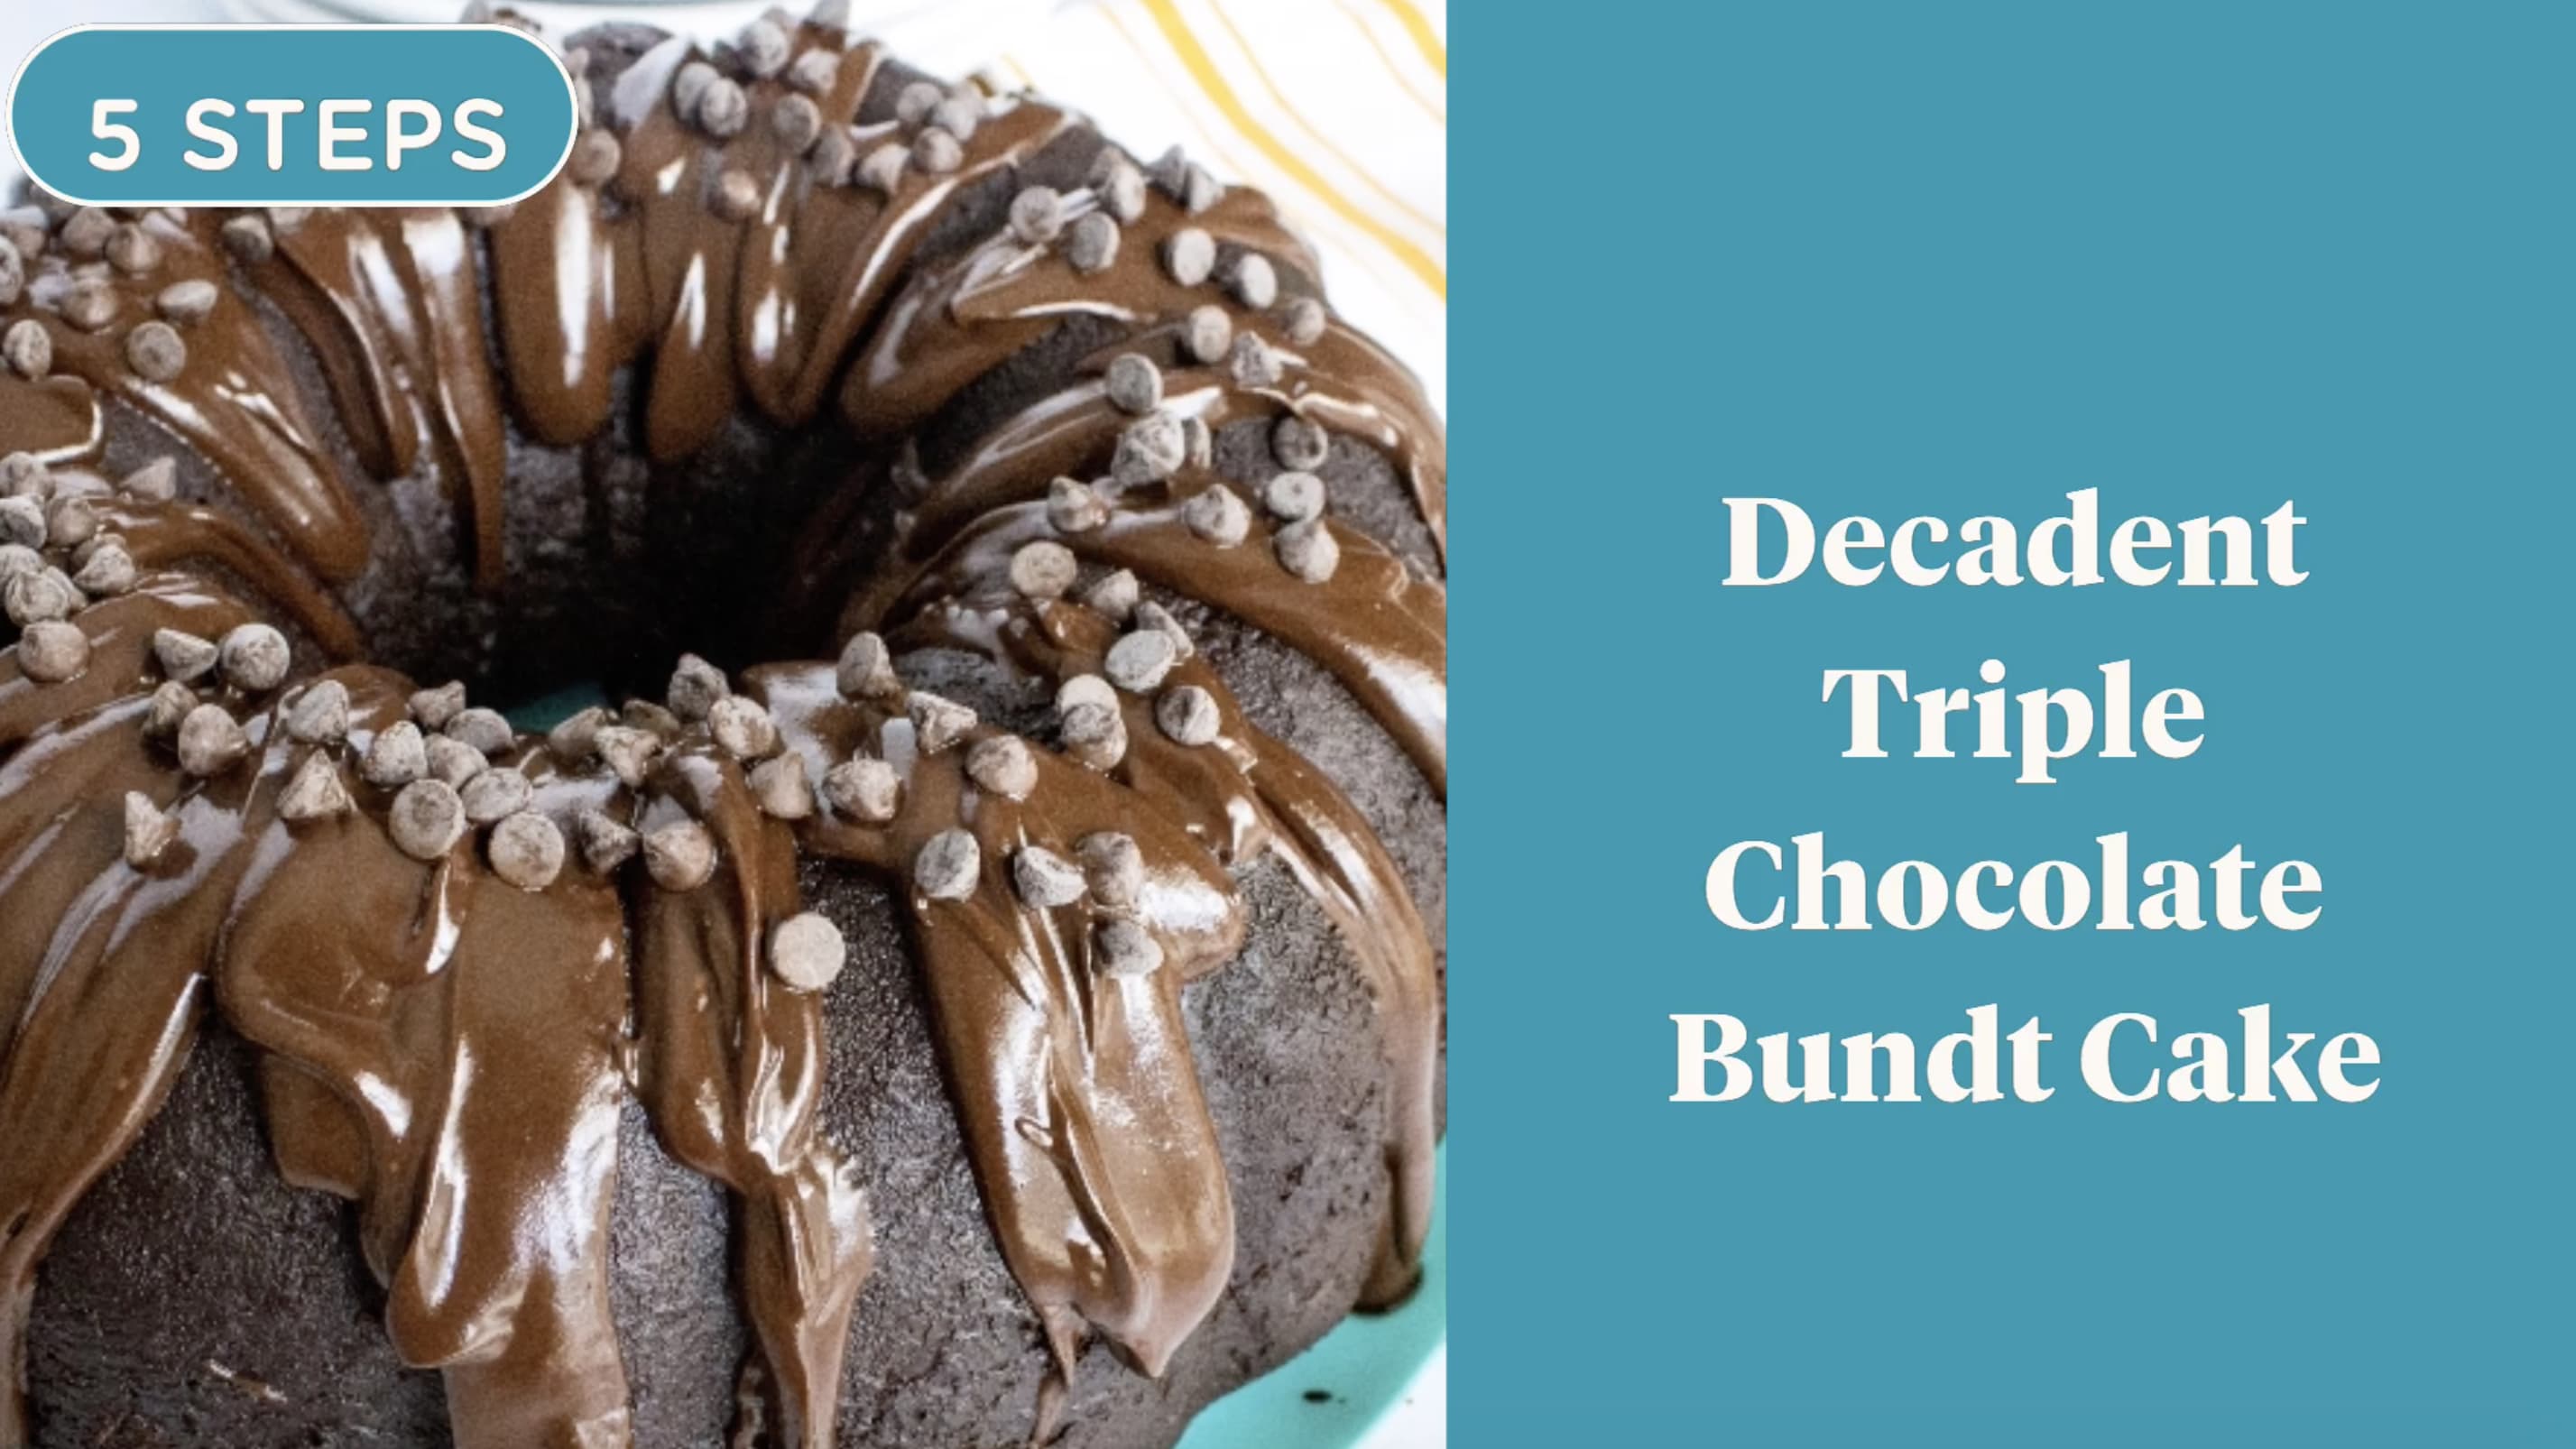 Make All the Bundt Cakes of Your Dreams with This Boxed Cake Mix